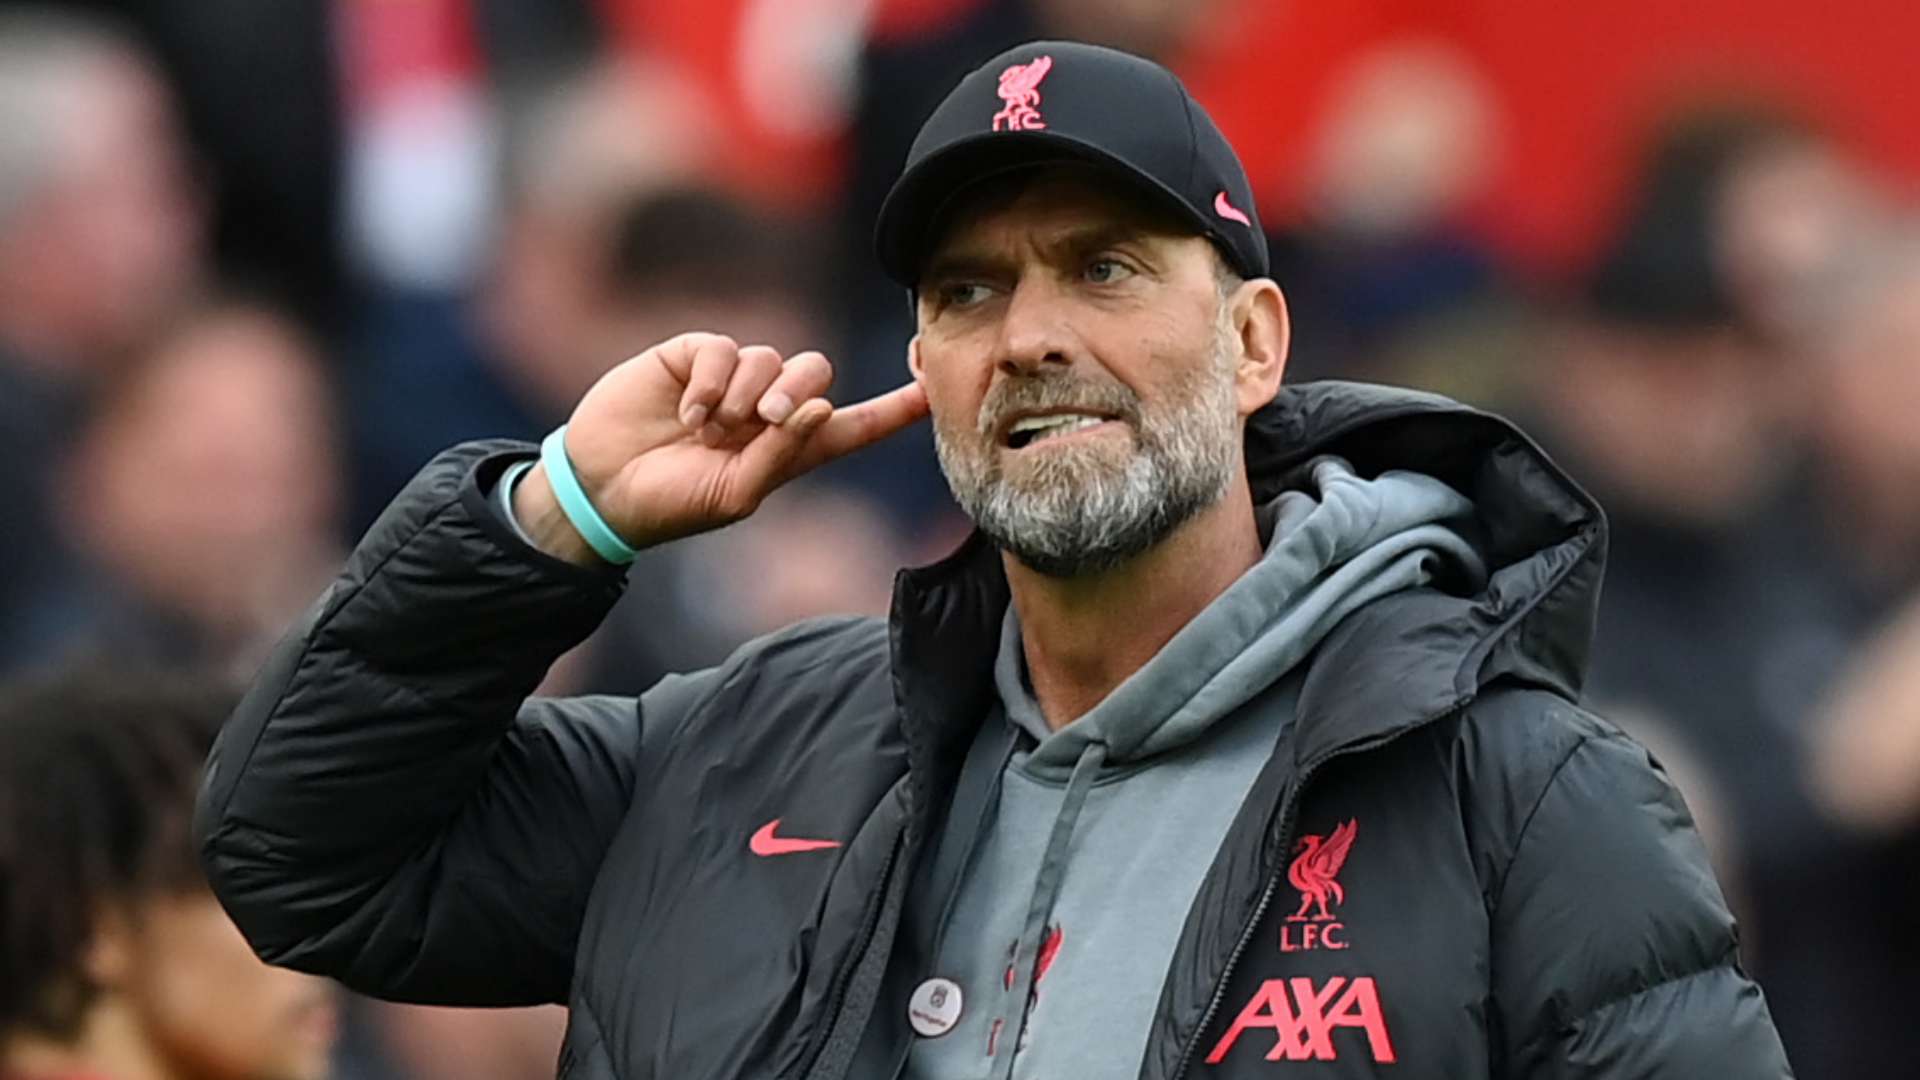 Explained: Why Jurgen Klopp made shock decision to quit Liverpool this  summer despite title chase with Man City and current contract not expiring  until 2026 | Goal.com